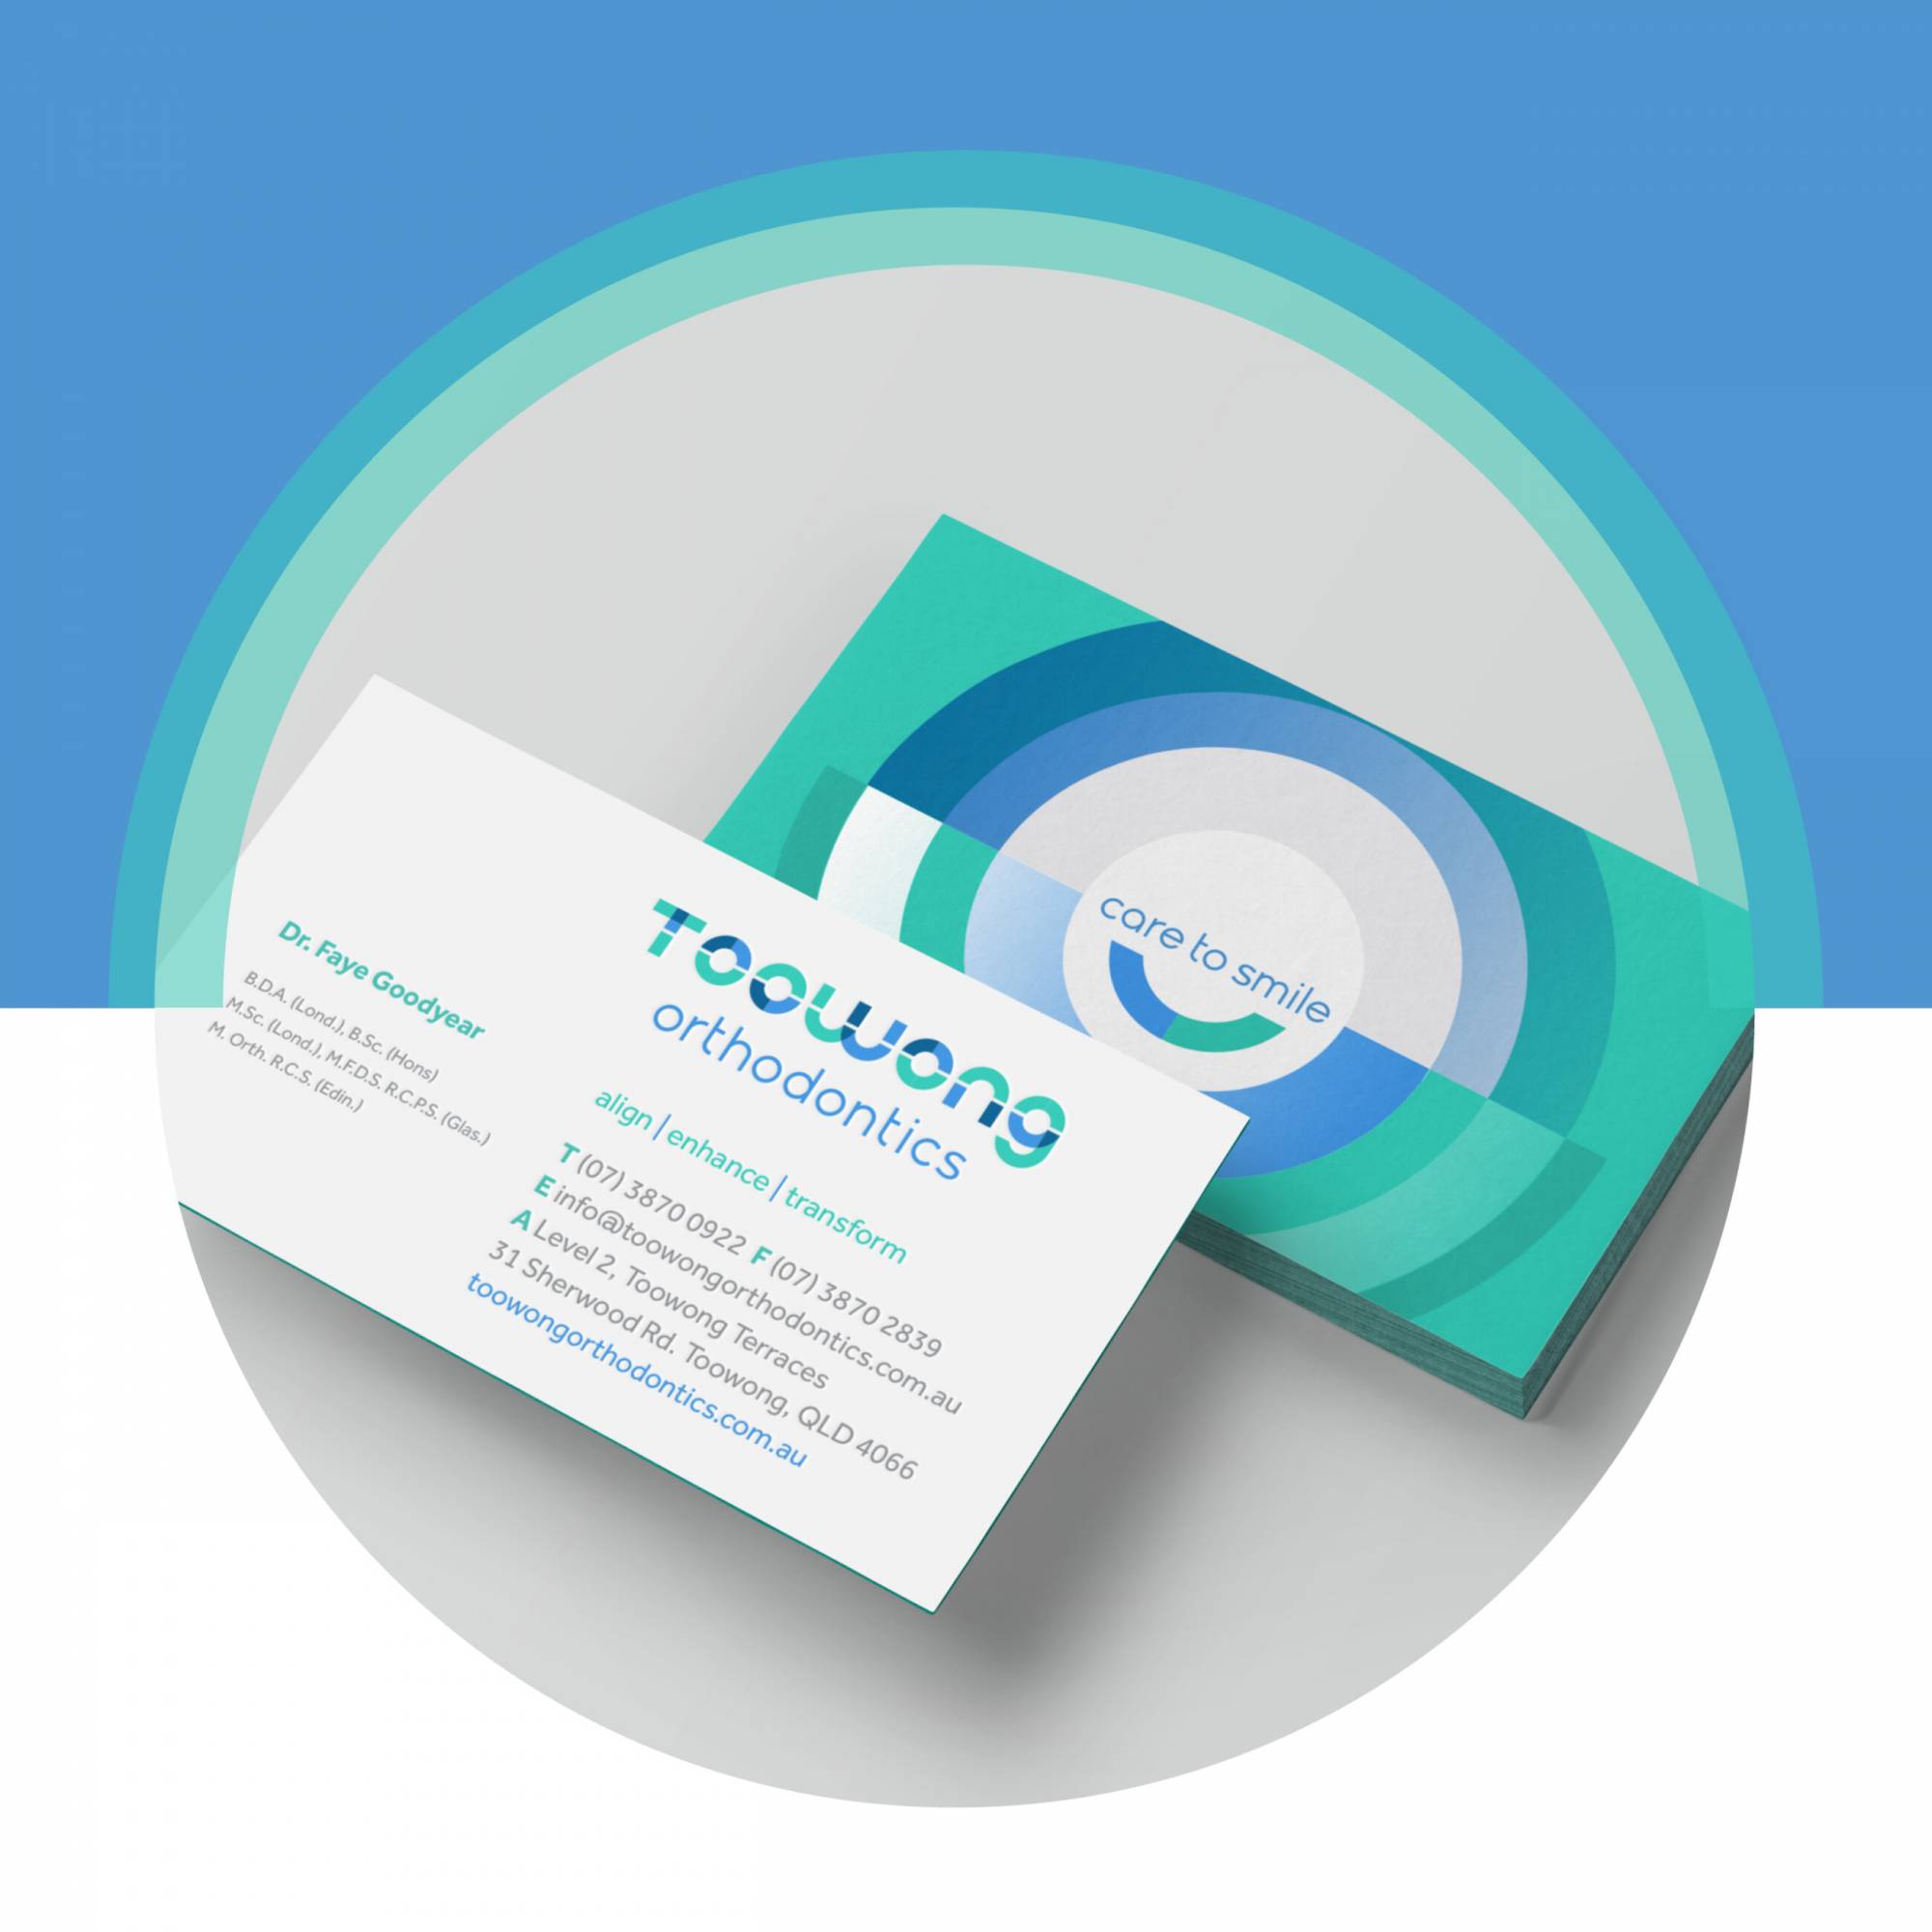 Toowong Orthodontics corporate collateral design and production